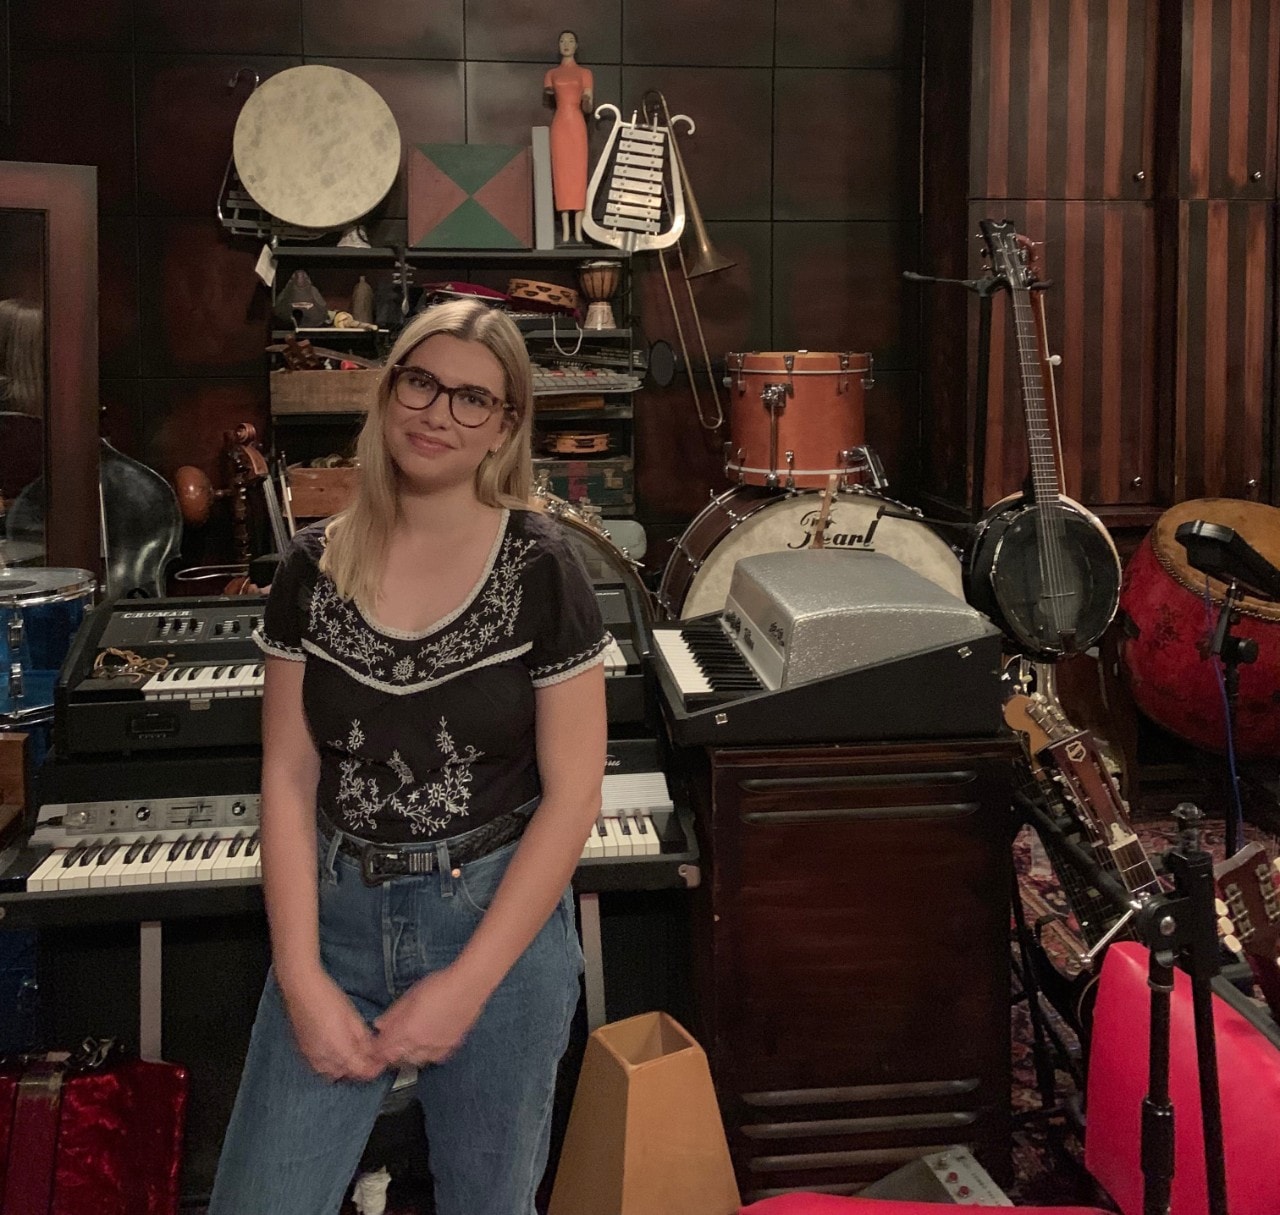 Chloe Sinclair in the Matter Music studio surrounded by musical instruments and memorabilia